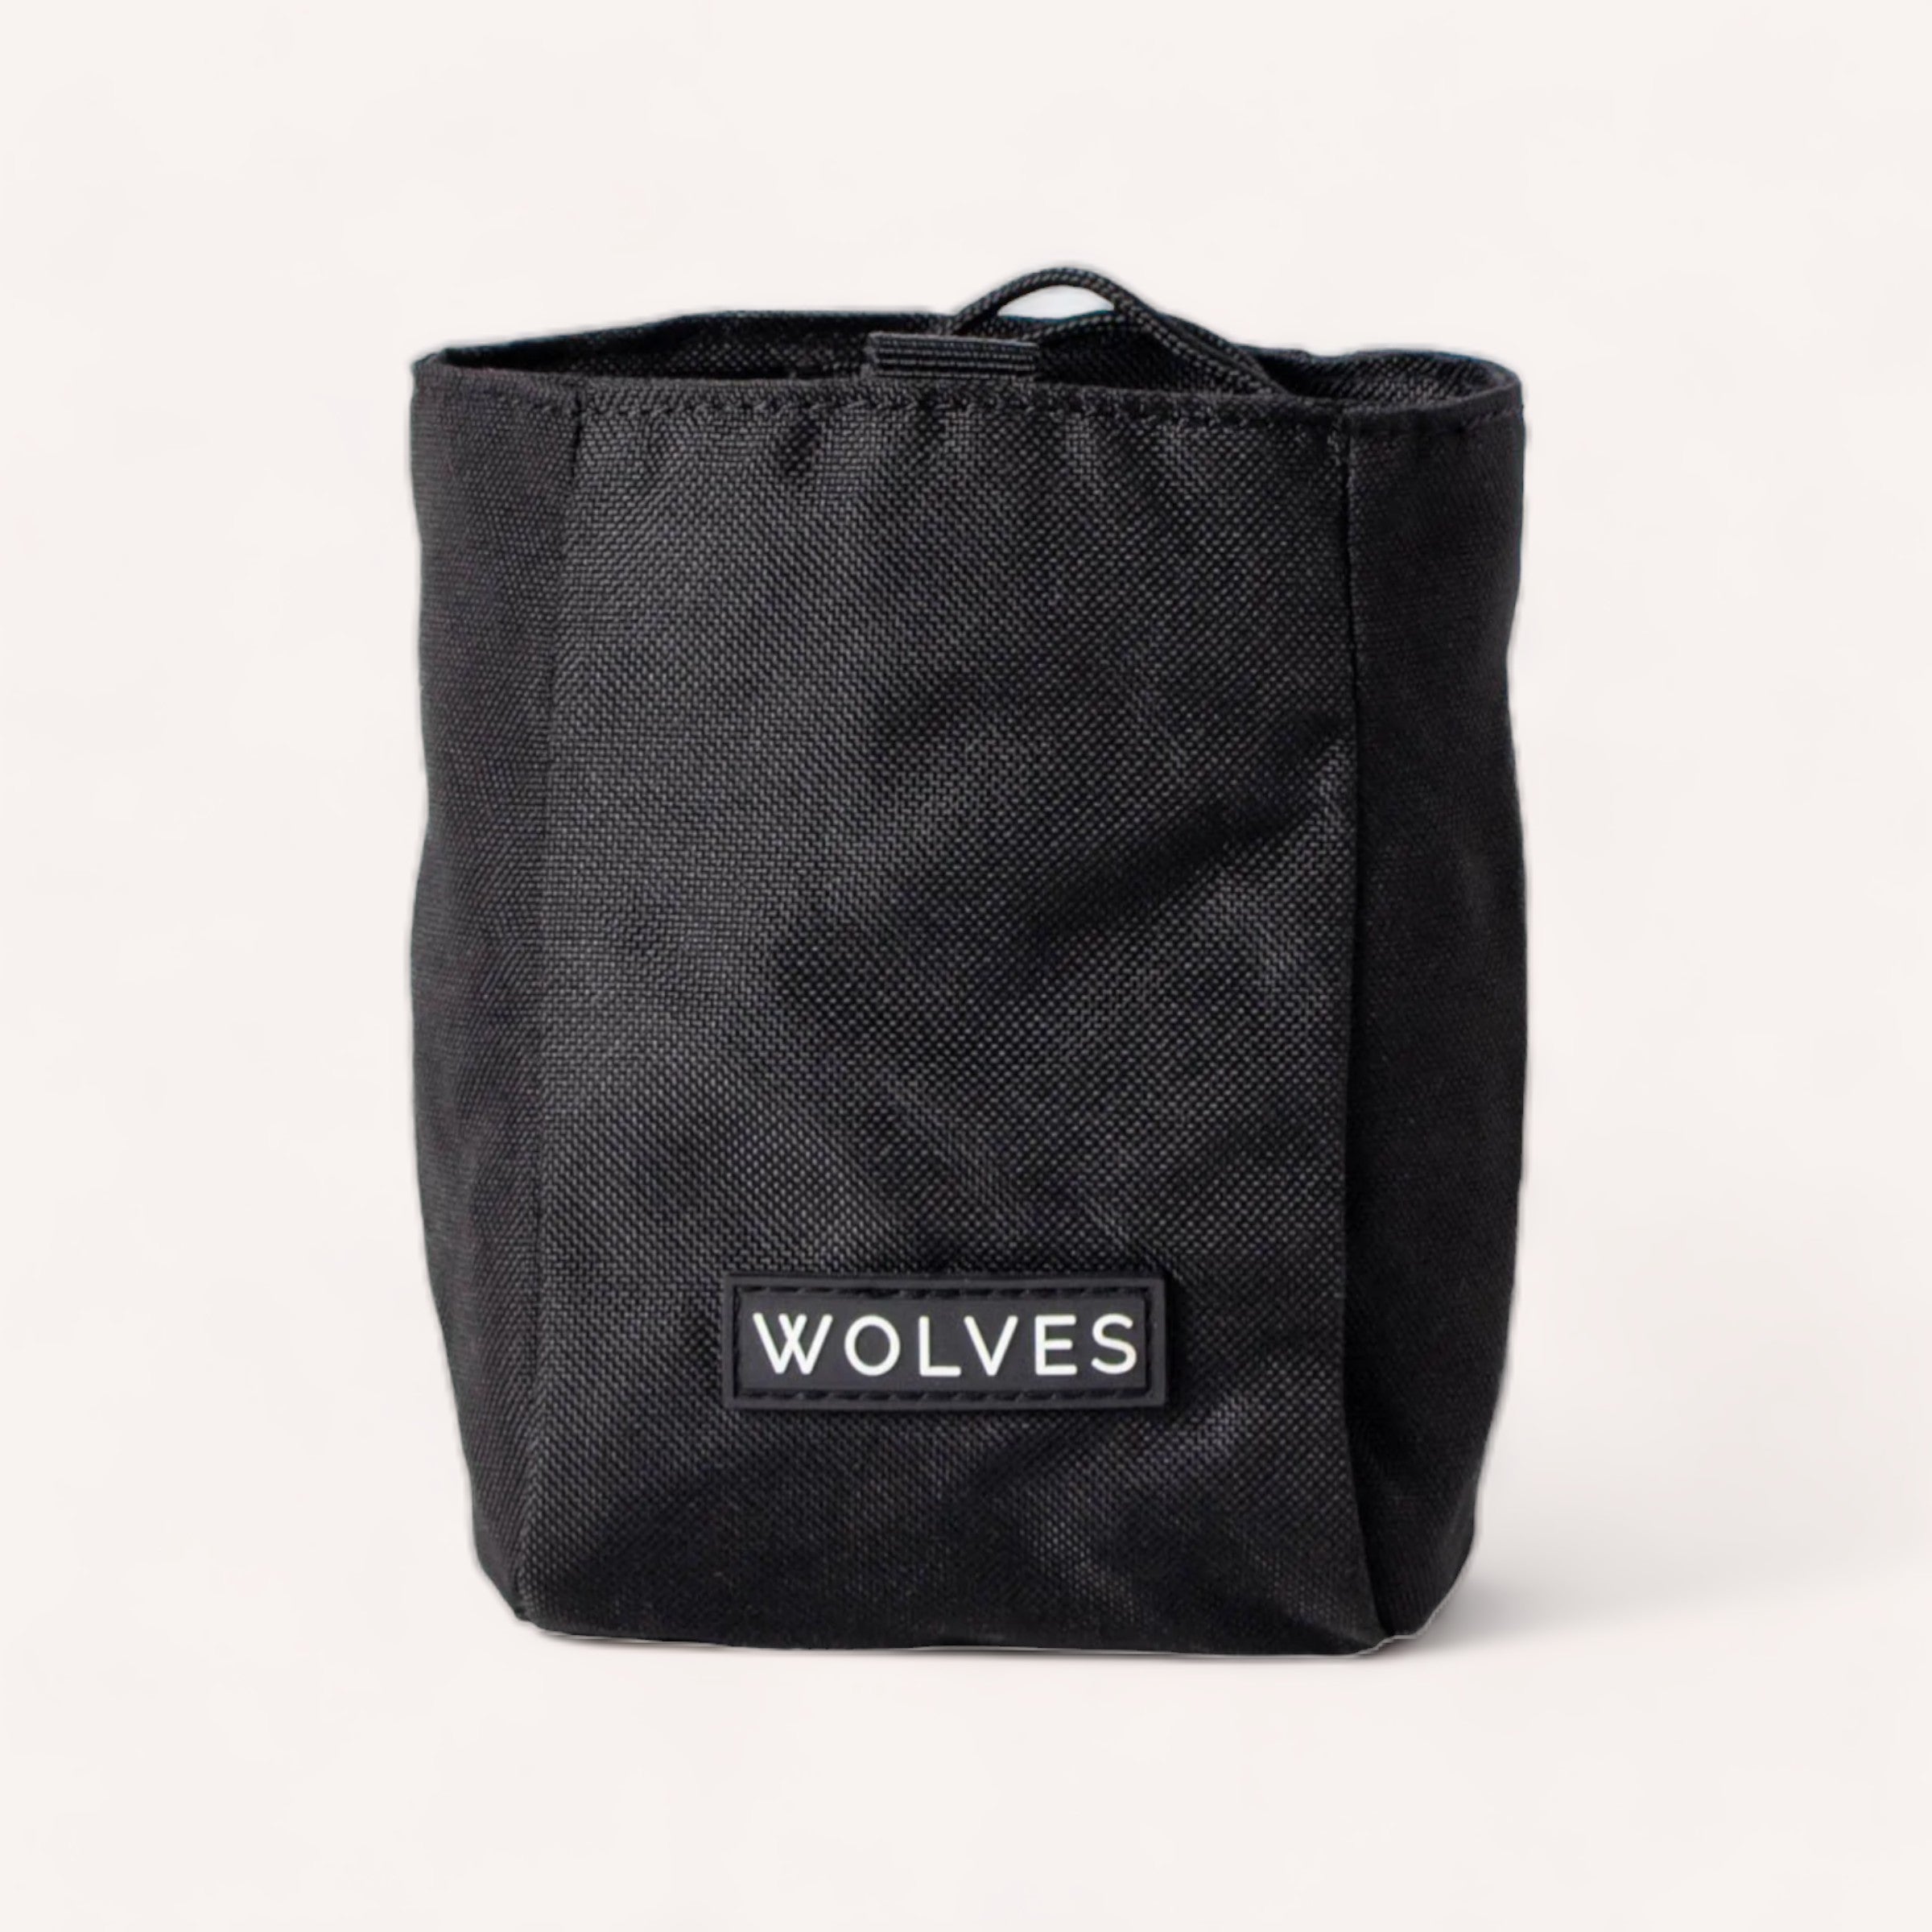 A Black Treat Pouch by Wolves of Wellington with the word "wolves" on a white label, useful for positive reinforcement training.